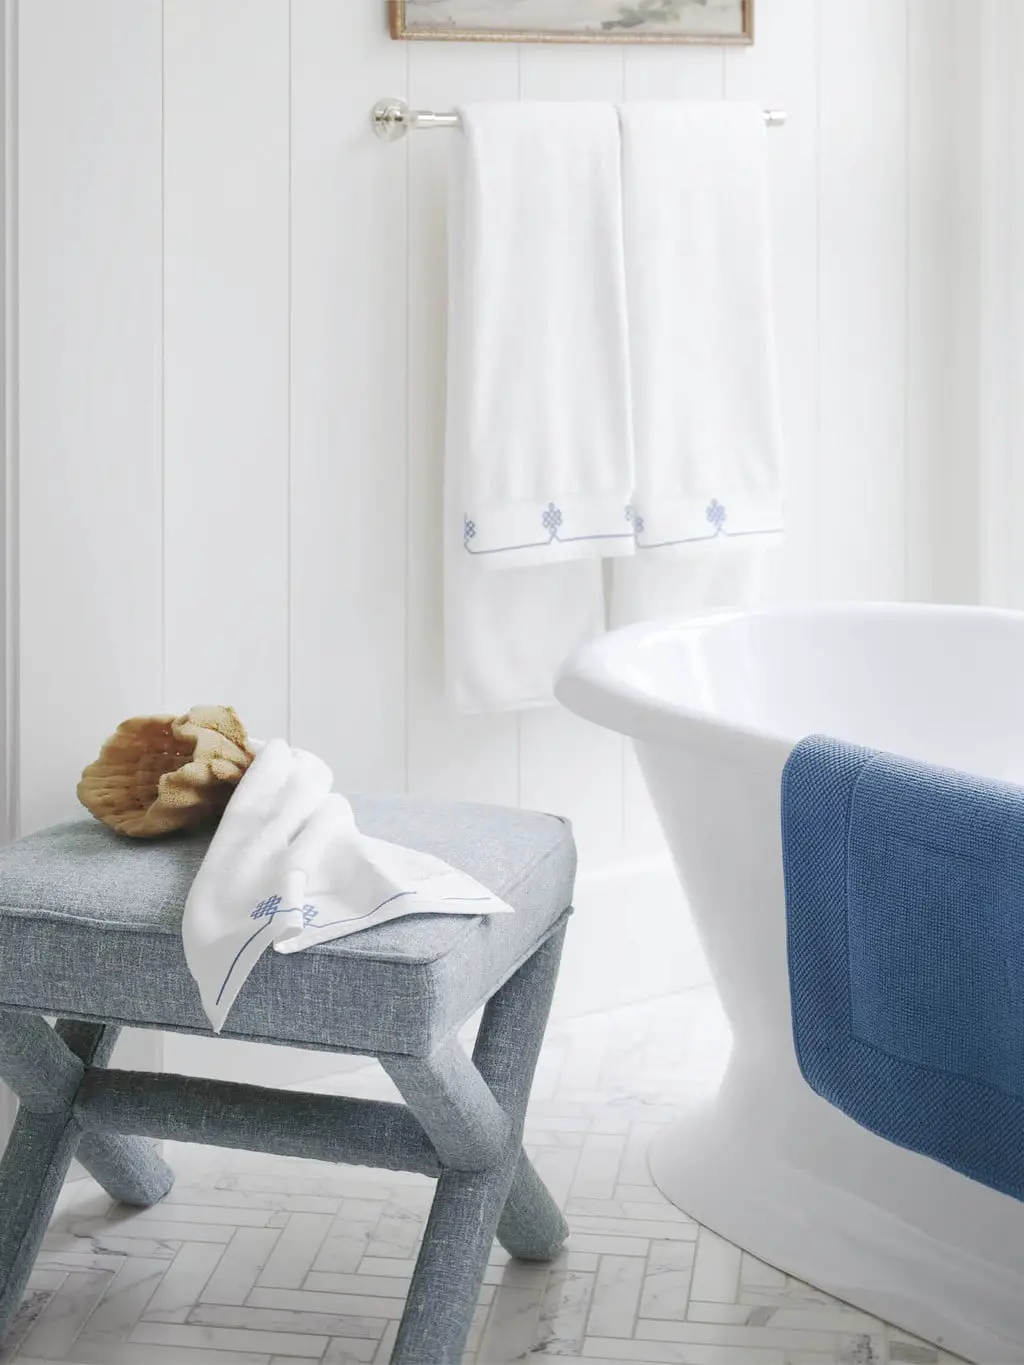 Classic blue and white bathroom with upholstered x bench by the bathtub on Thou Swell #bathroom #blueandwhite #bathtub #xbench